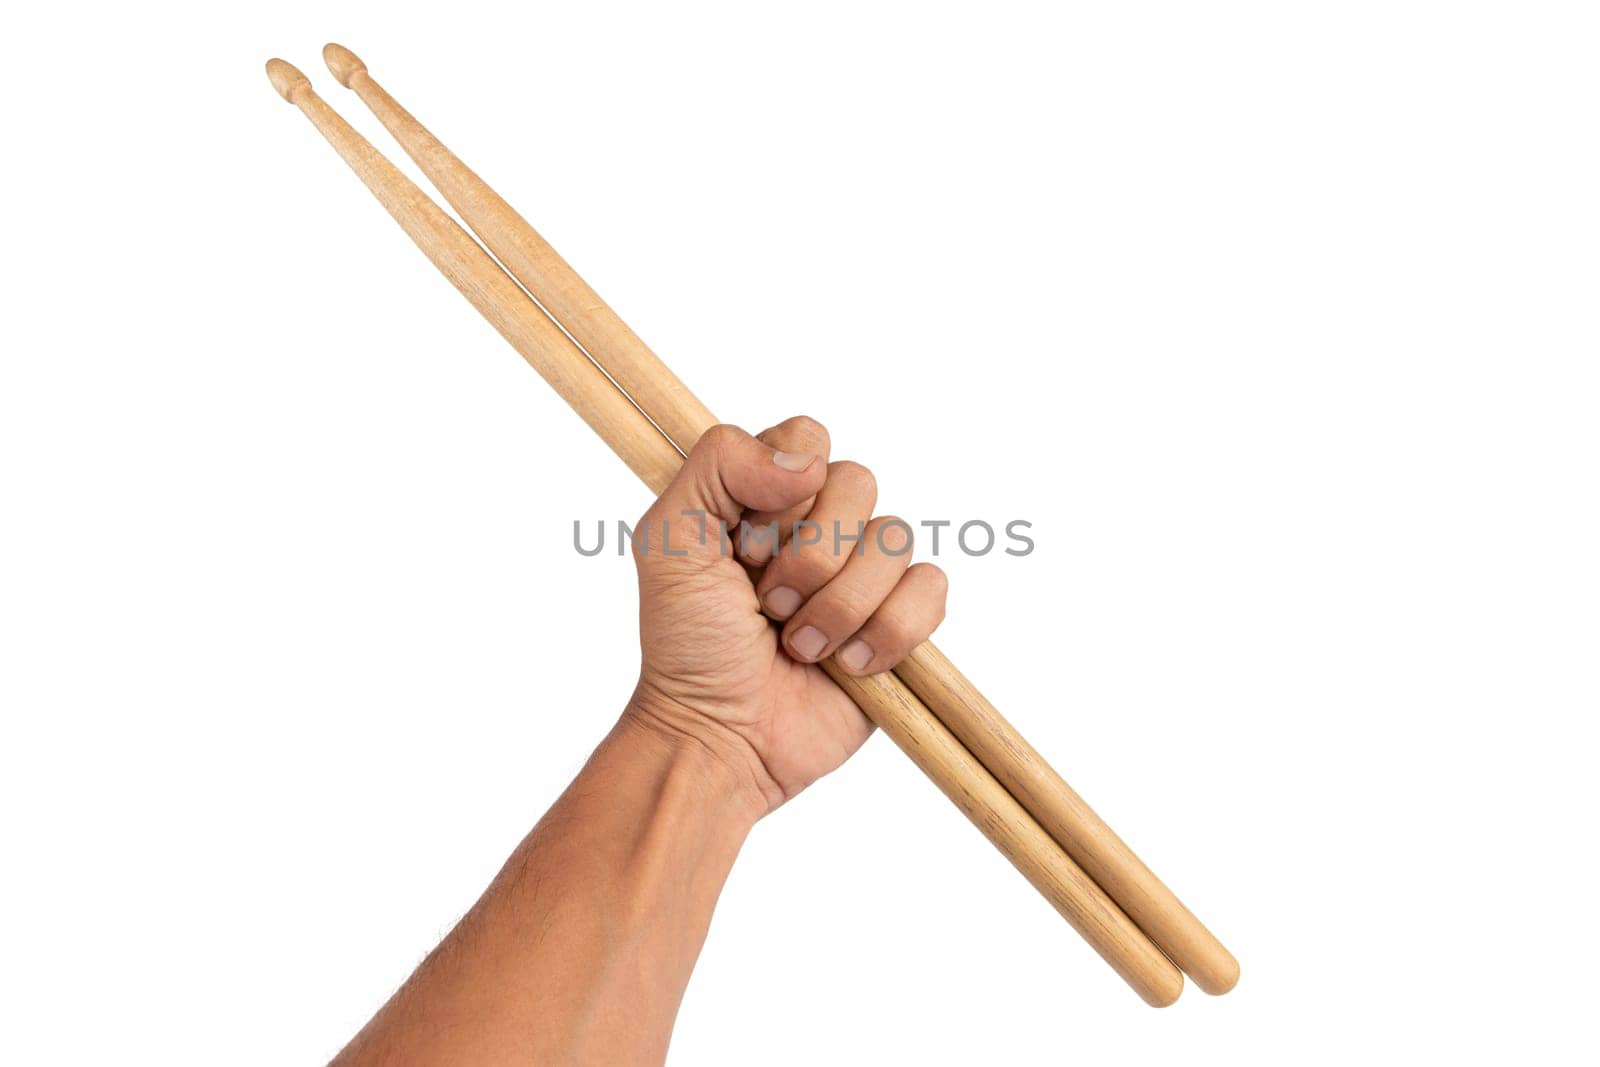 Black male hand holding wooden Drum sticks isolated on white background by TropicalNinjaStudio